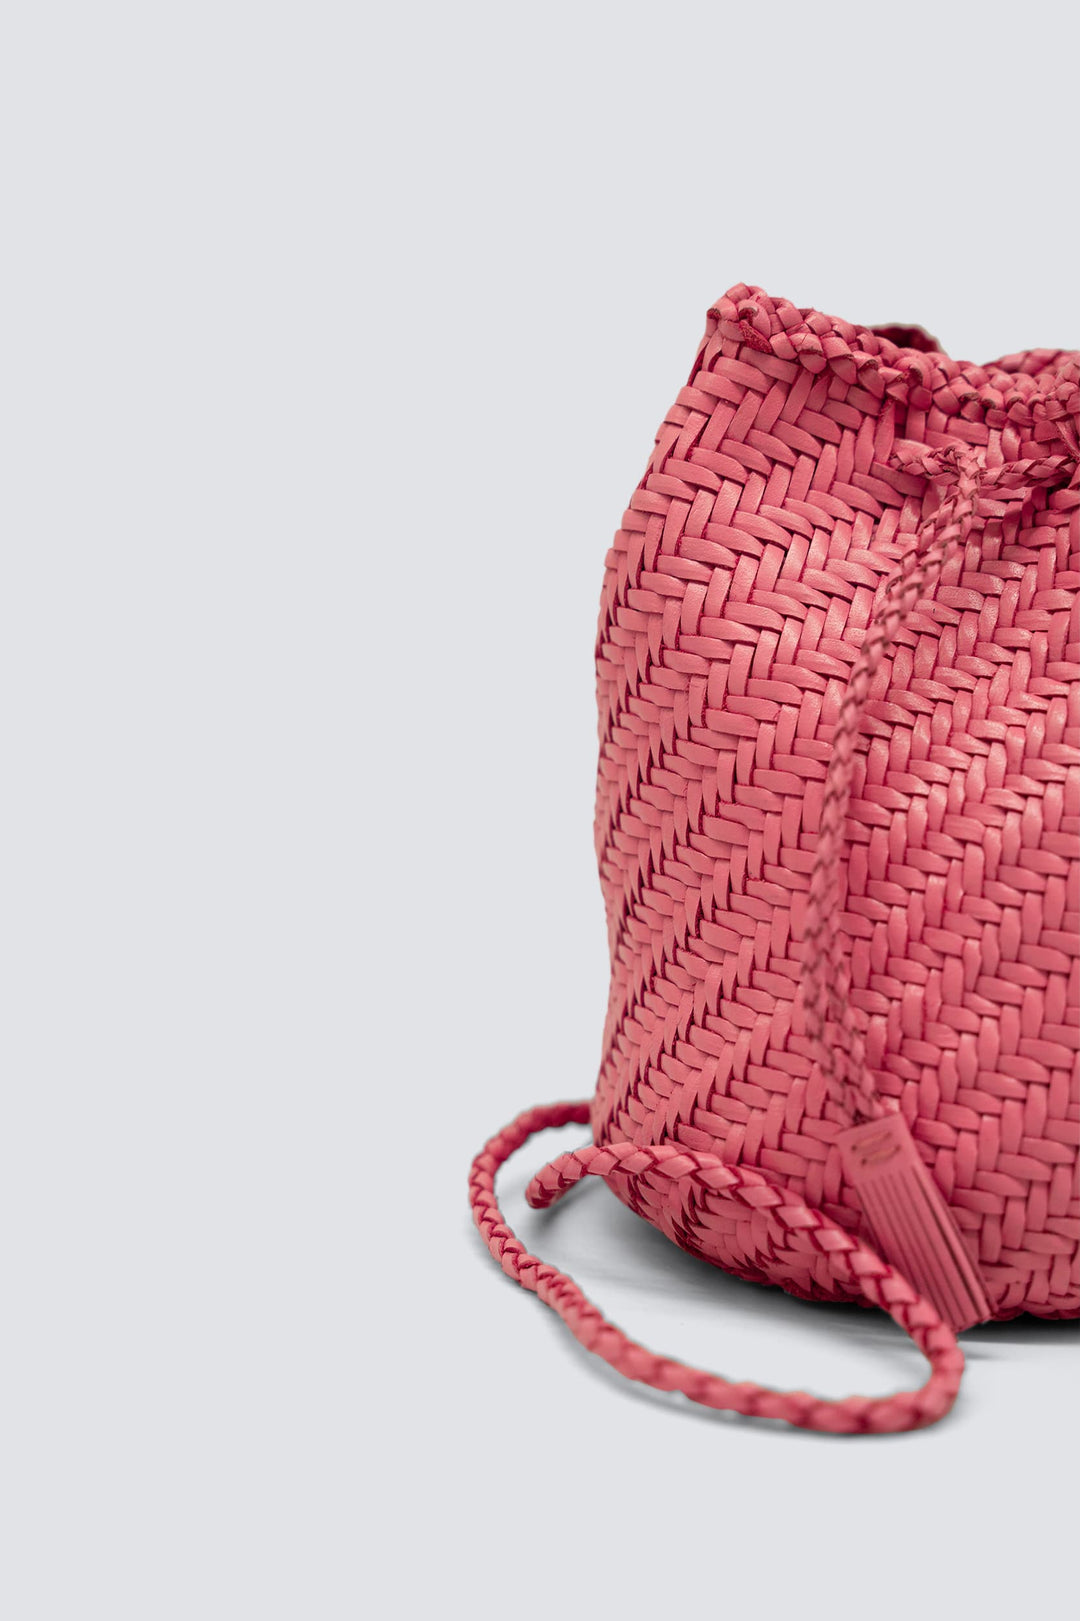 Dragon Diffusion woven leather bag handmade - Pompom Double Jump Strawberry